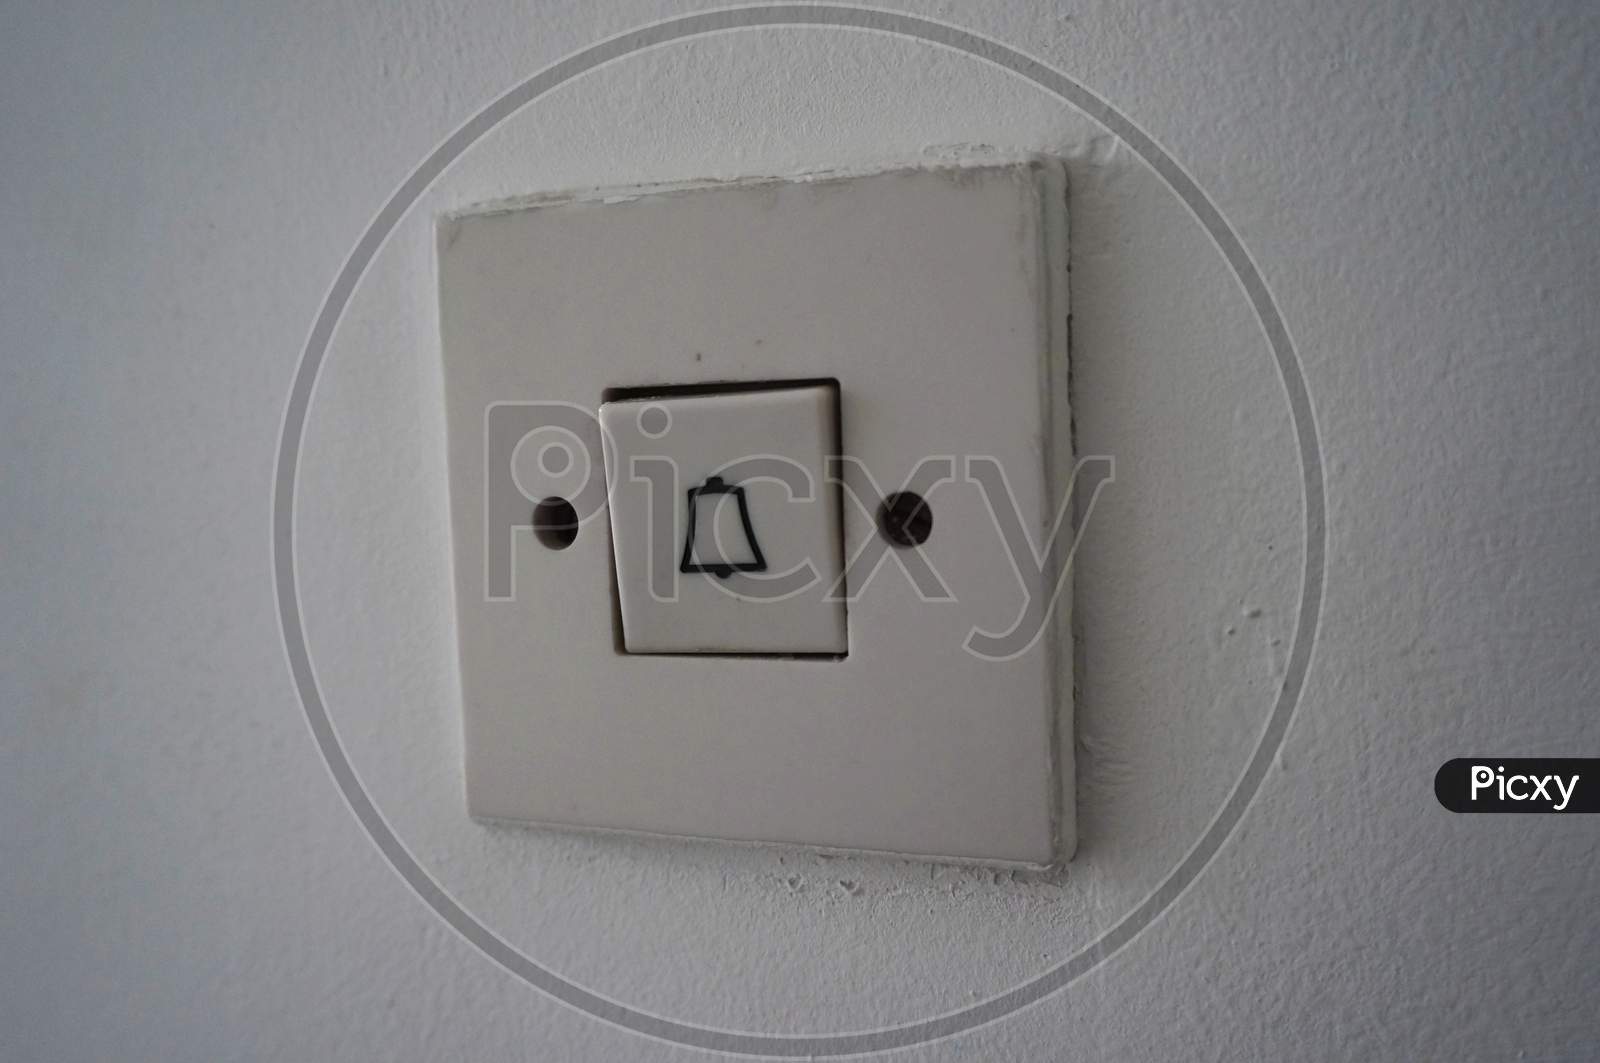 Switch bell on Wall